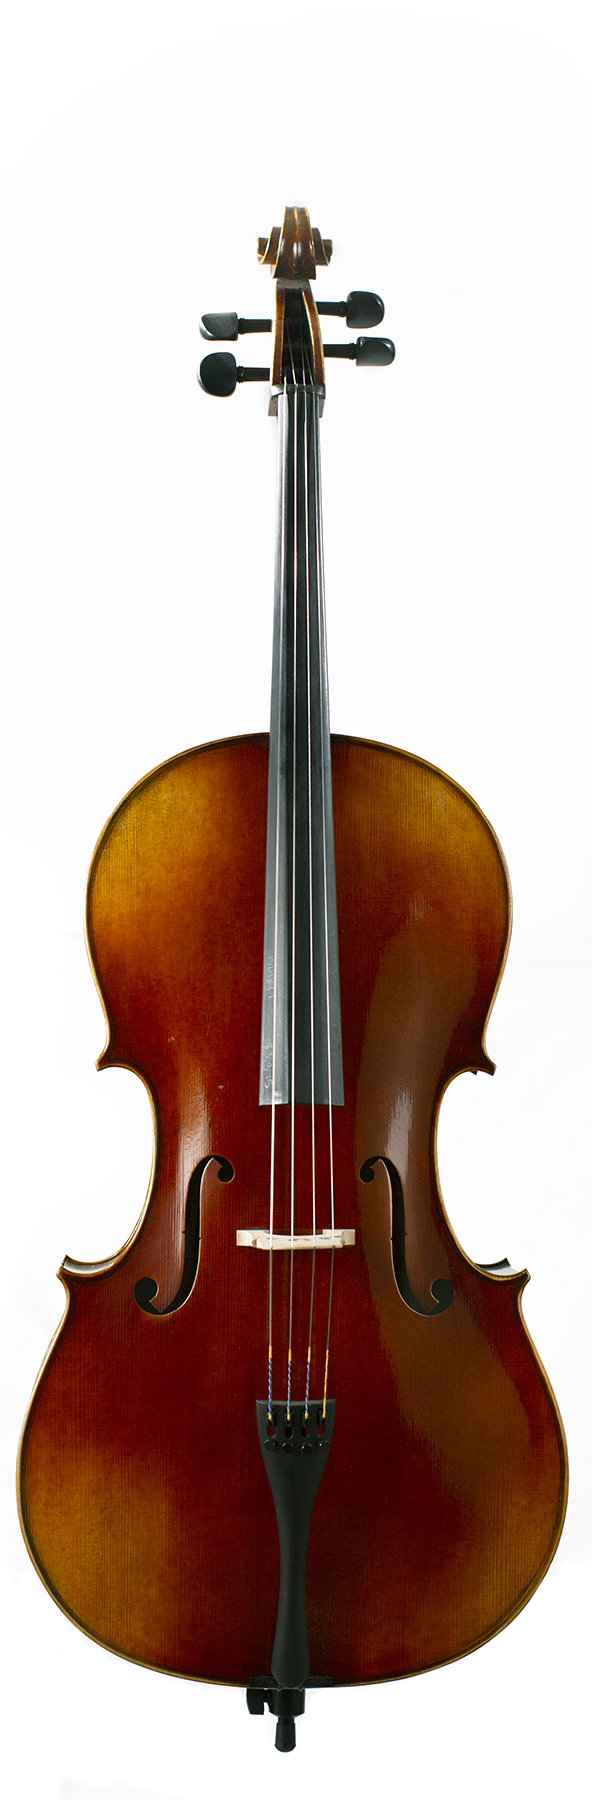 A chand-made cello with a well-rounded tone.